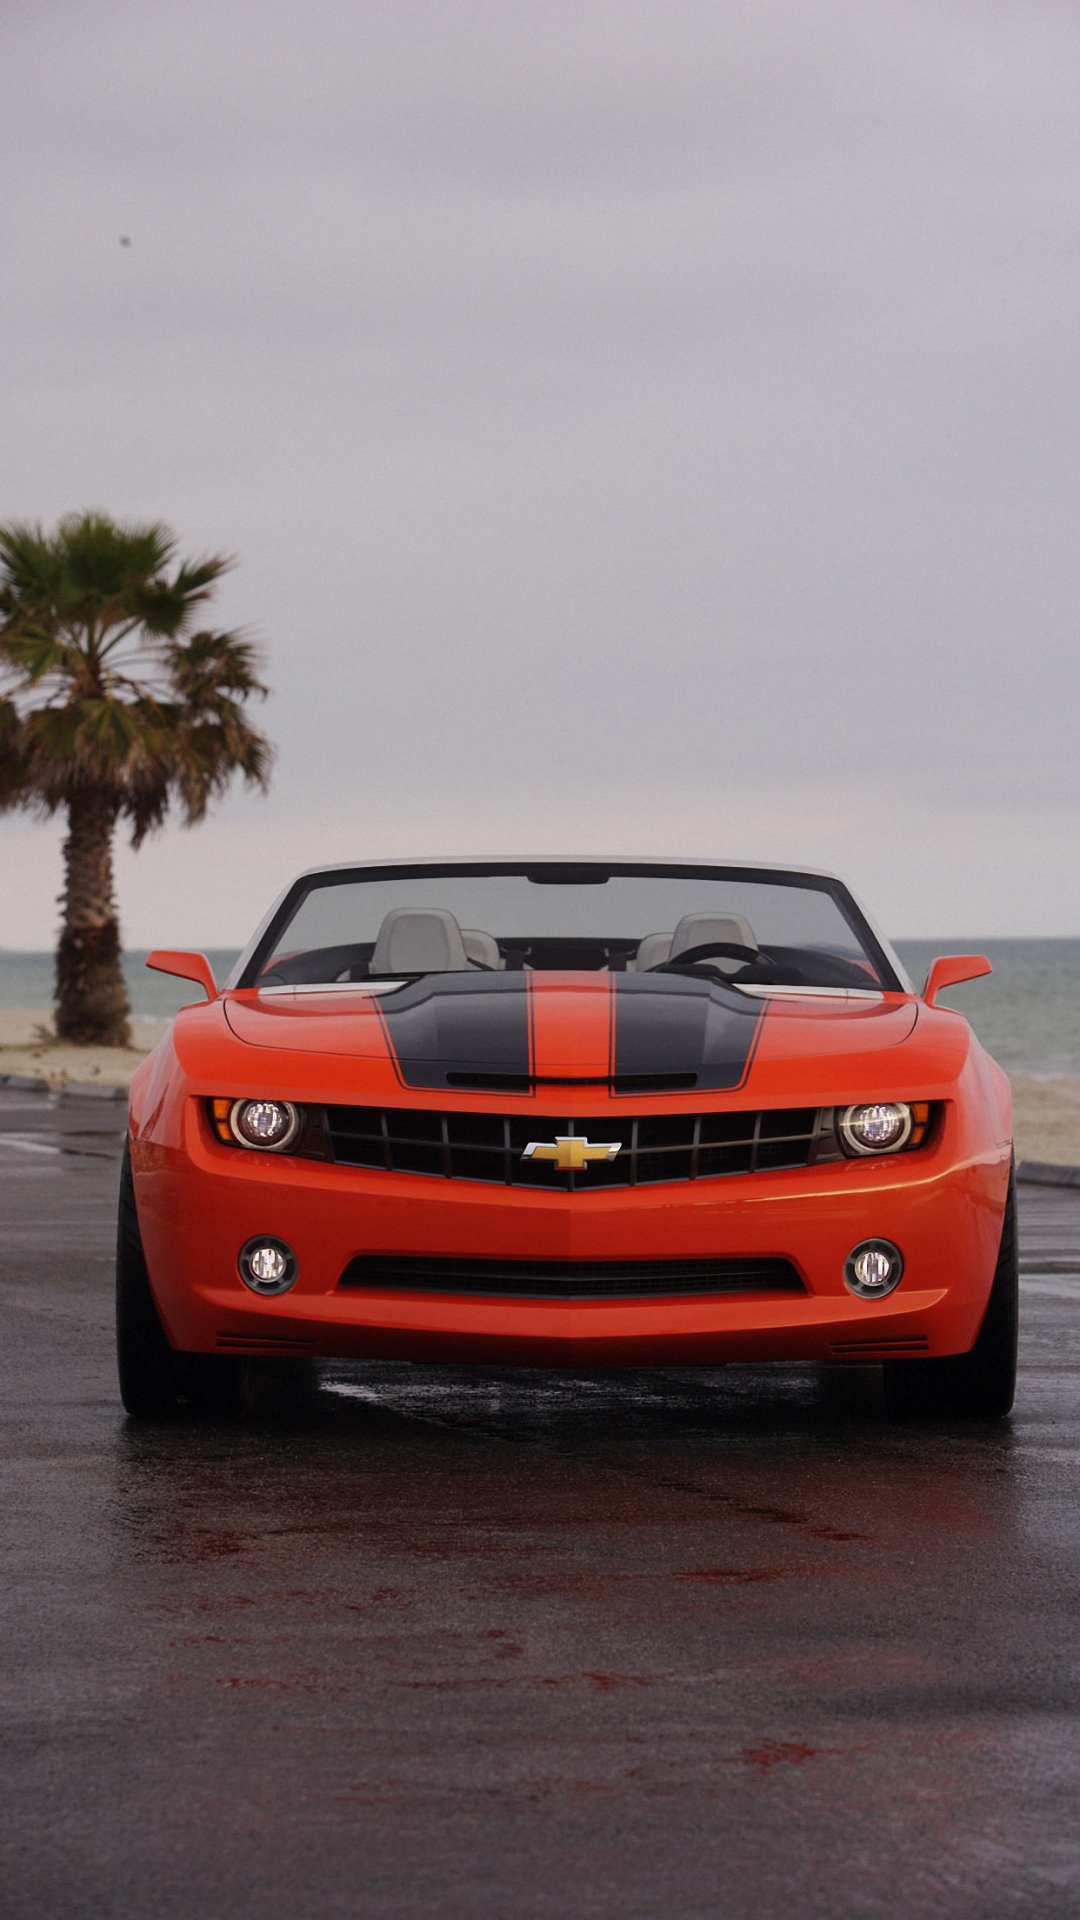 Download wallpaper 938x1668 chevrolet camaro chevrolet car black front  view iphone 876s6 for parallax hd background